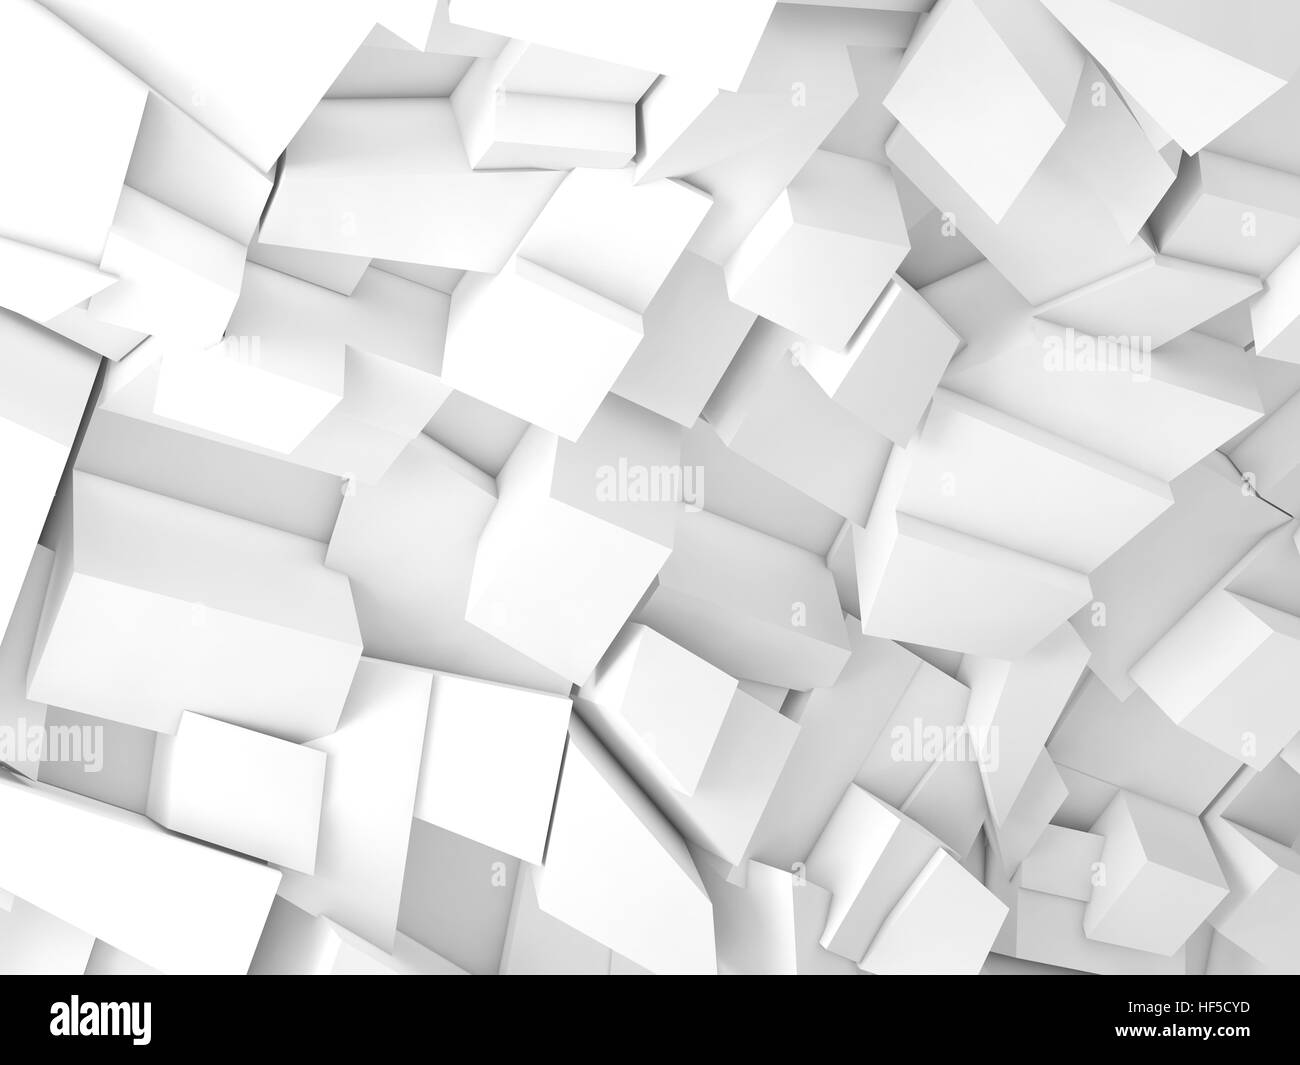 Abstract digital graphic background, white chaotic fragments pattern, 3d illustration Stock Photo